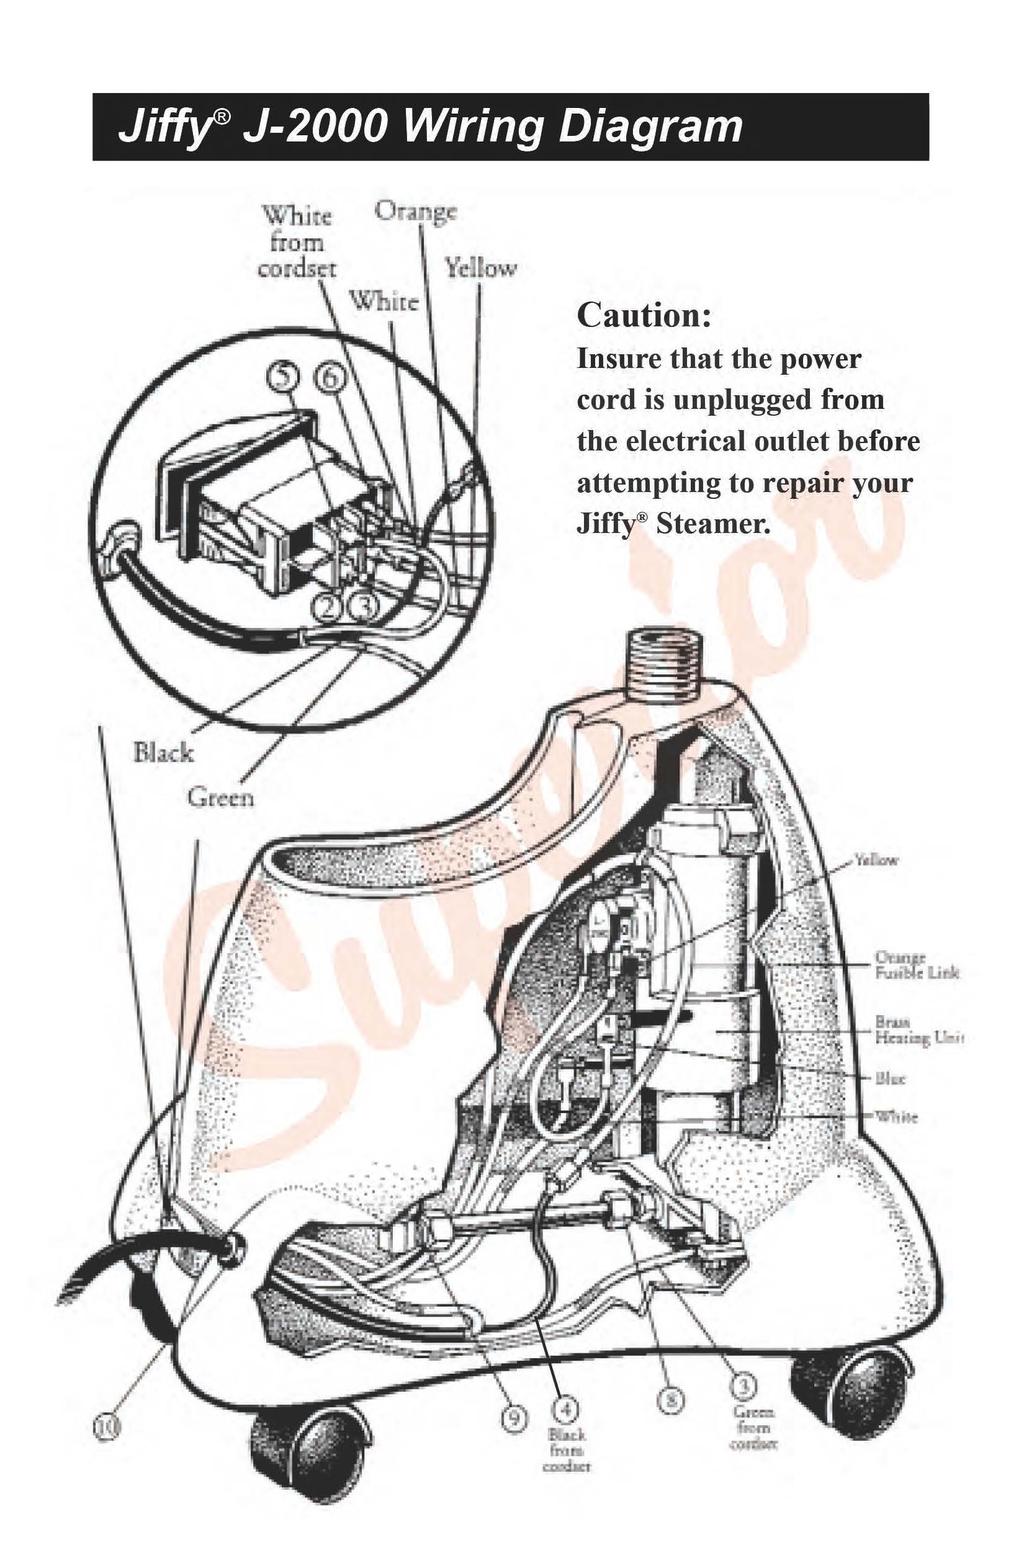 Jiffy J-2000 Wiring Diagram Caution: Insure that the power cord is